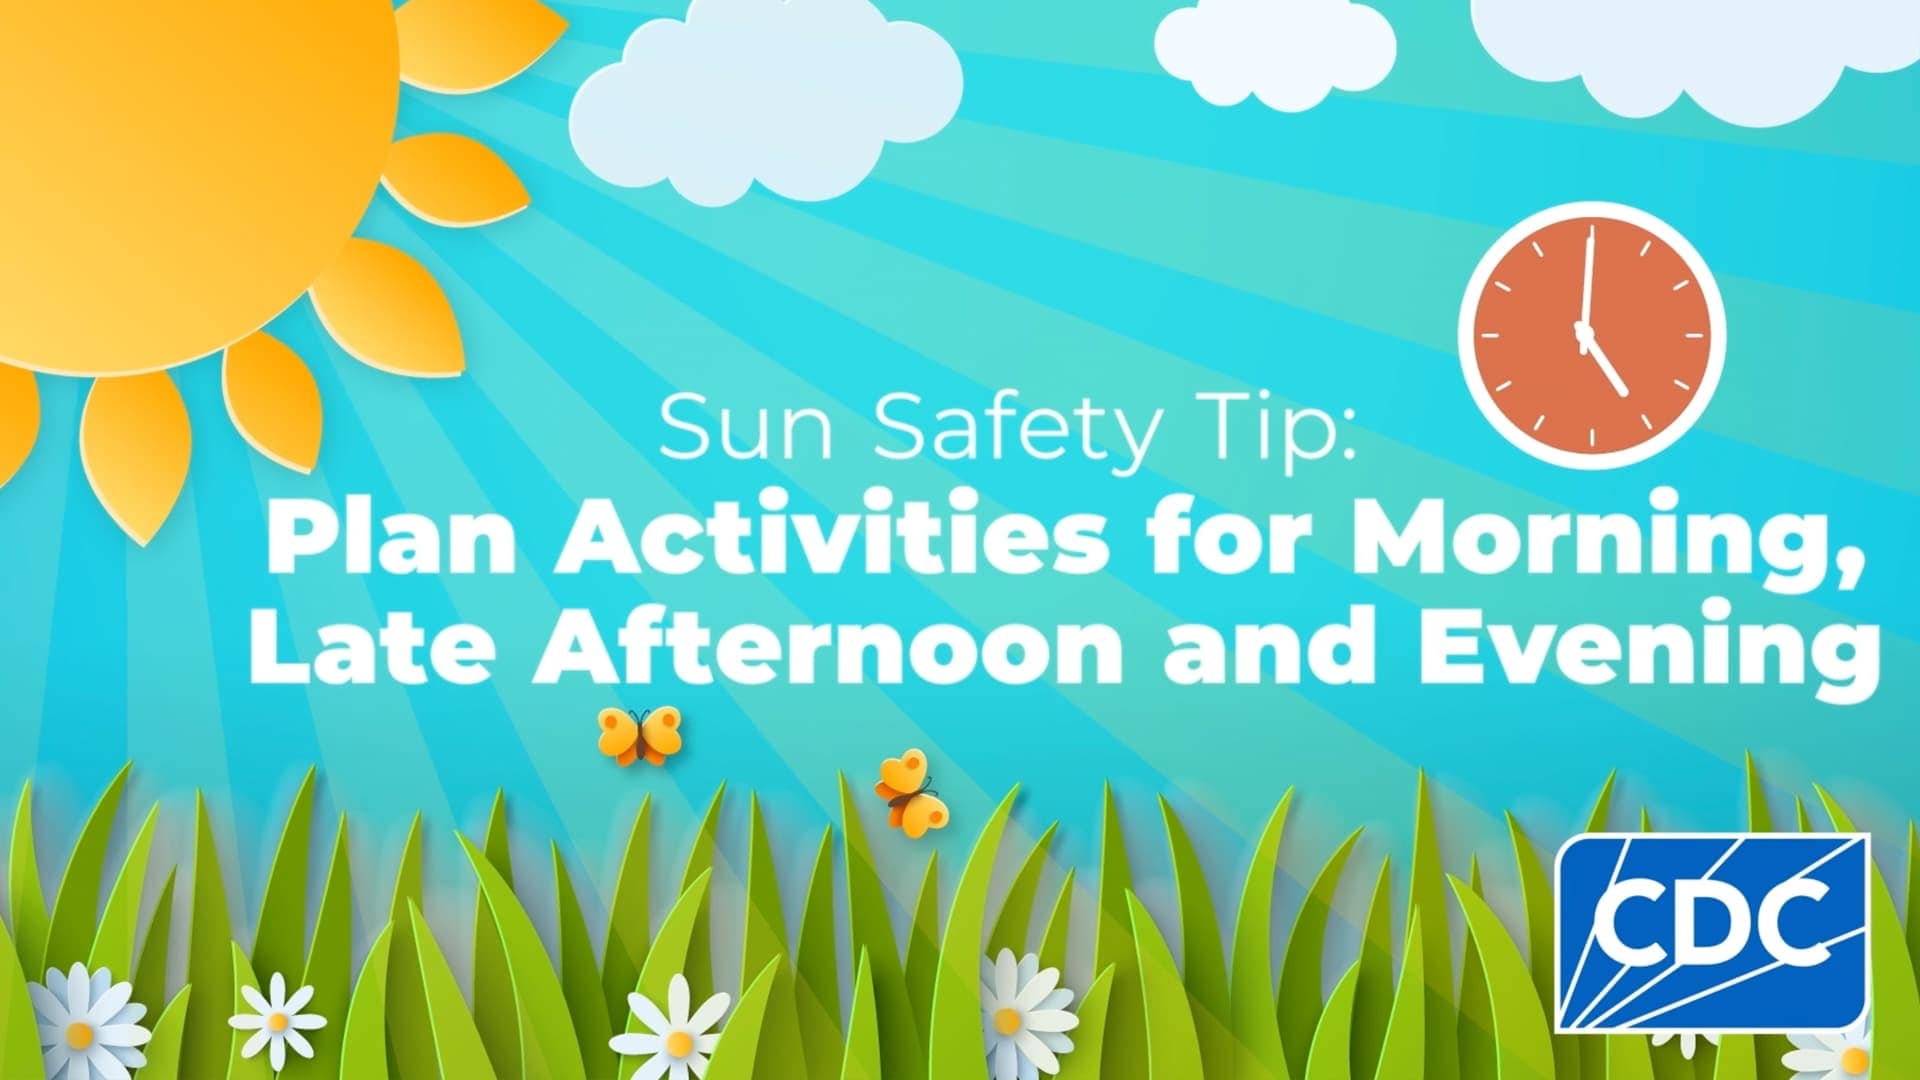 Sun Safety Tip: Plan Activities for Morning, Late Afternoon and Evening